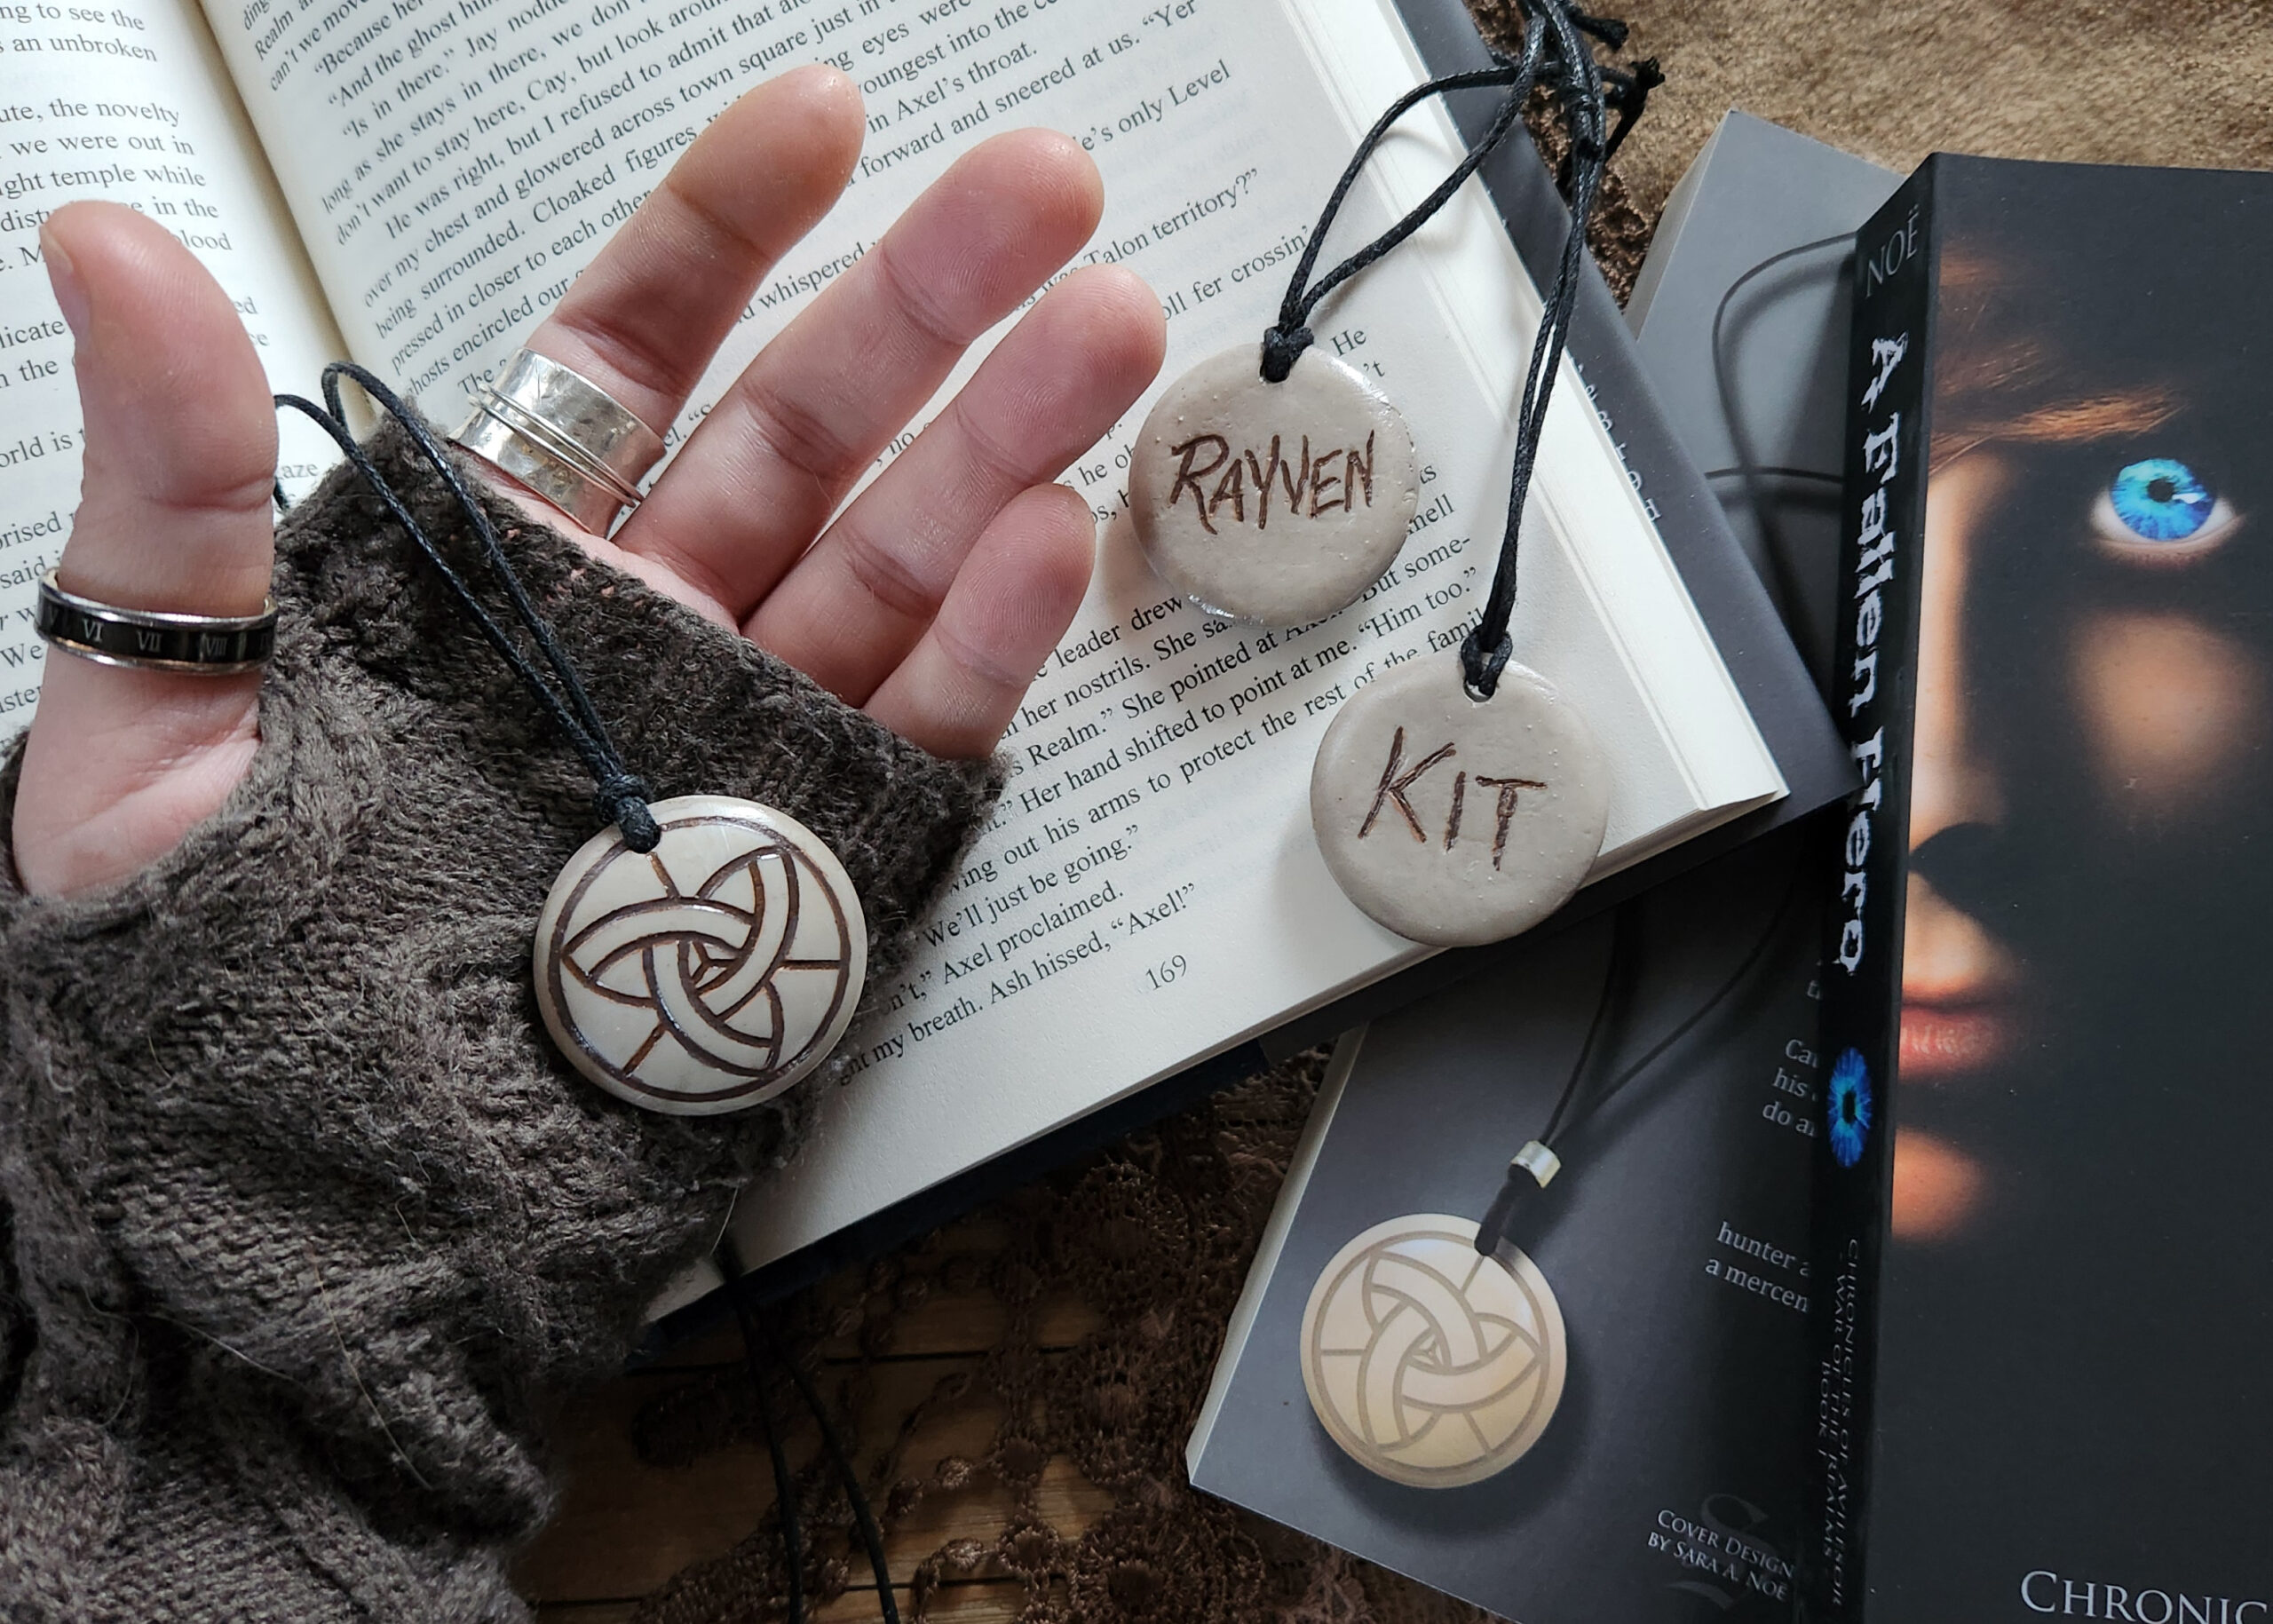 Kit and Rayven Aminyte pendants from the Chronicles of Avilesor: War of the Realms fantasy series